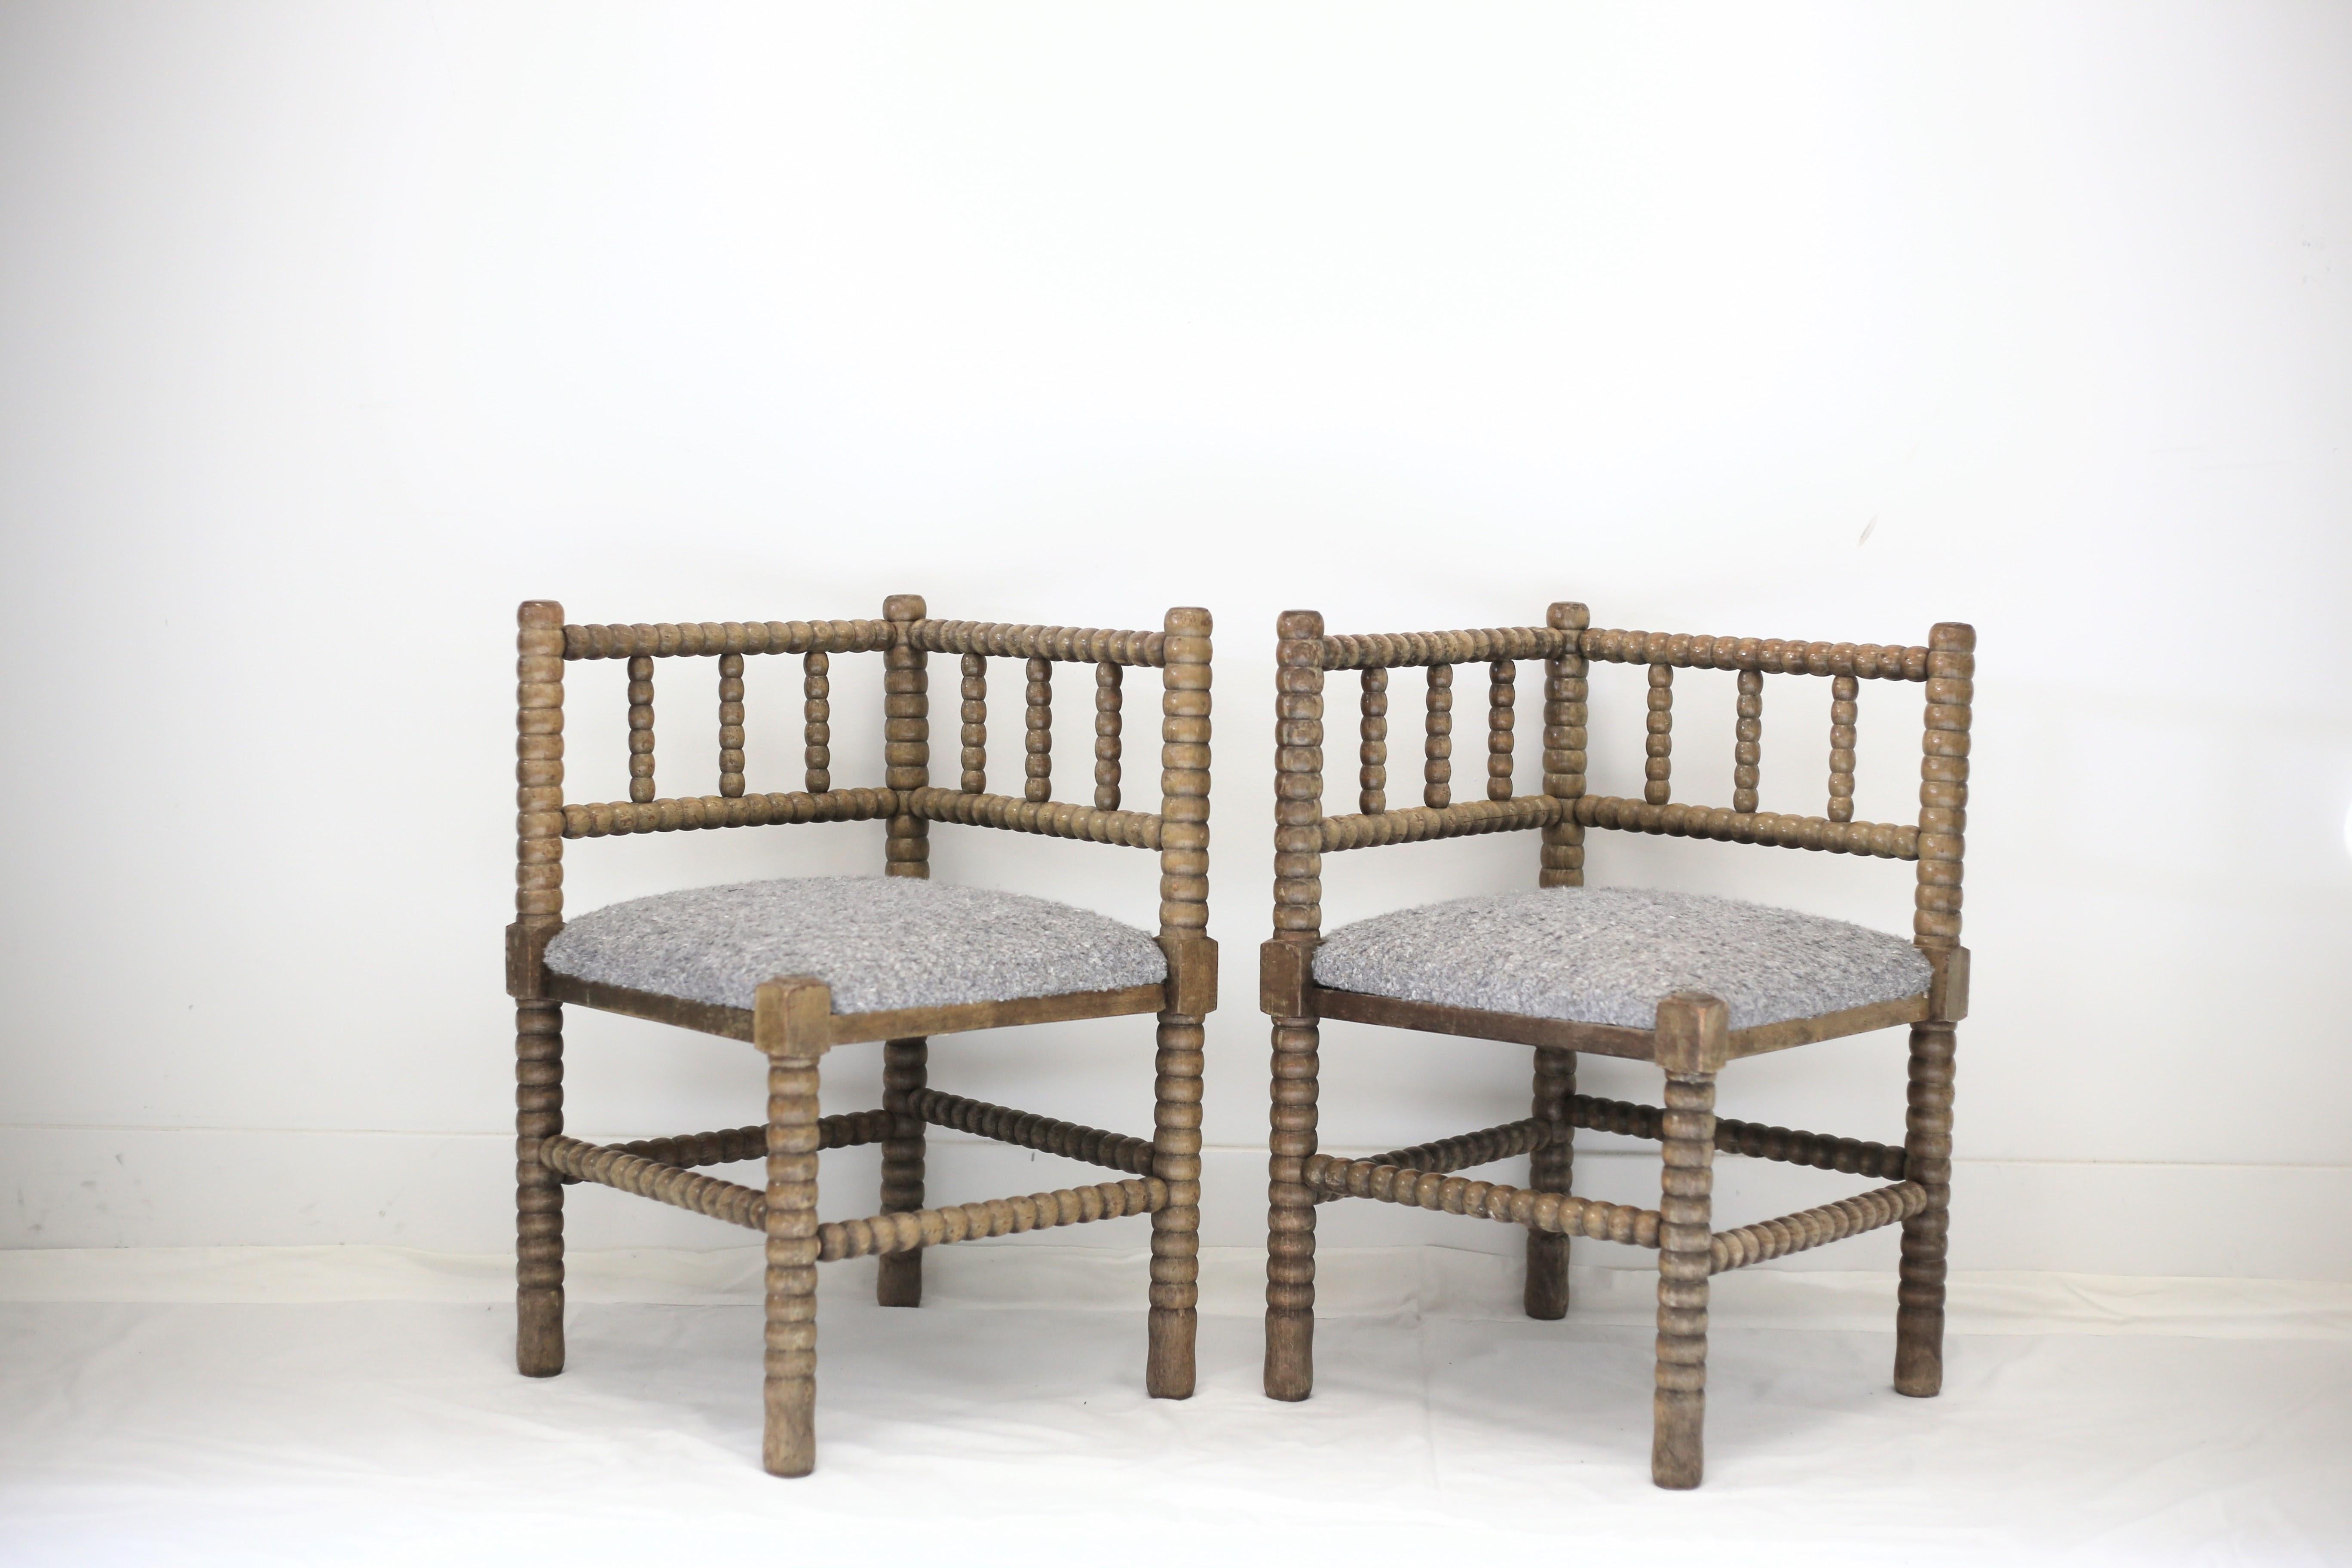 Vintage bobbin chairs
Newly upholstered in J Samuel Berber
Set of 4, finishes vary
Sold individually
FRN2047.
        